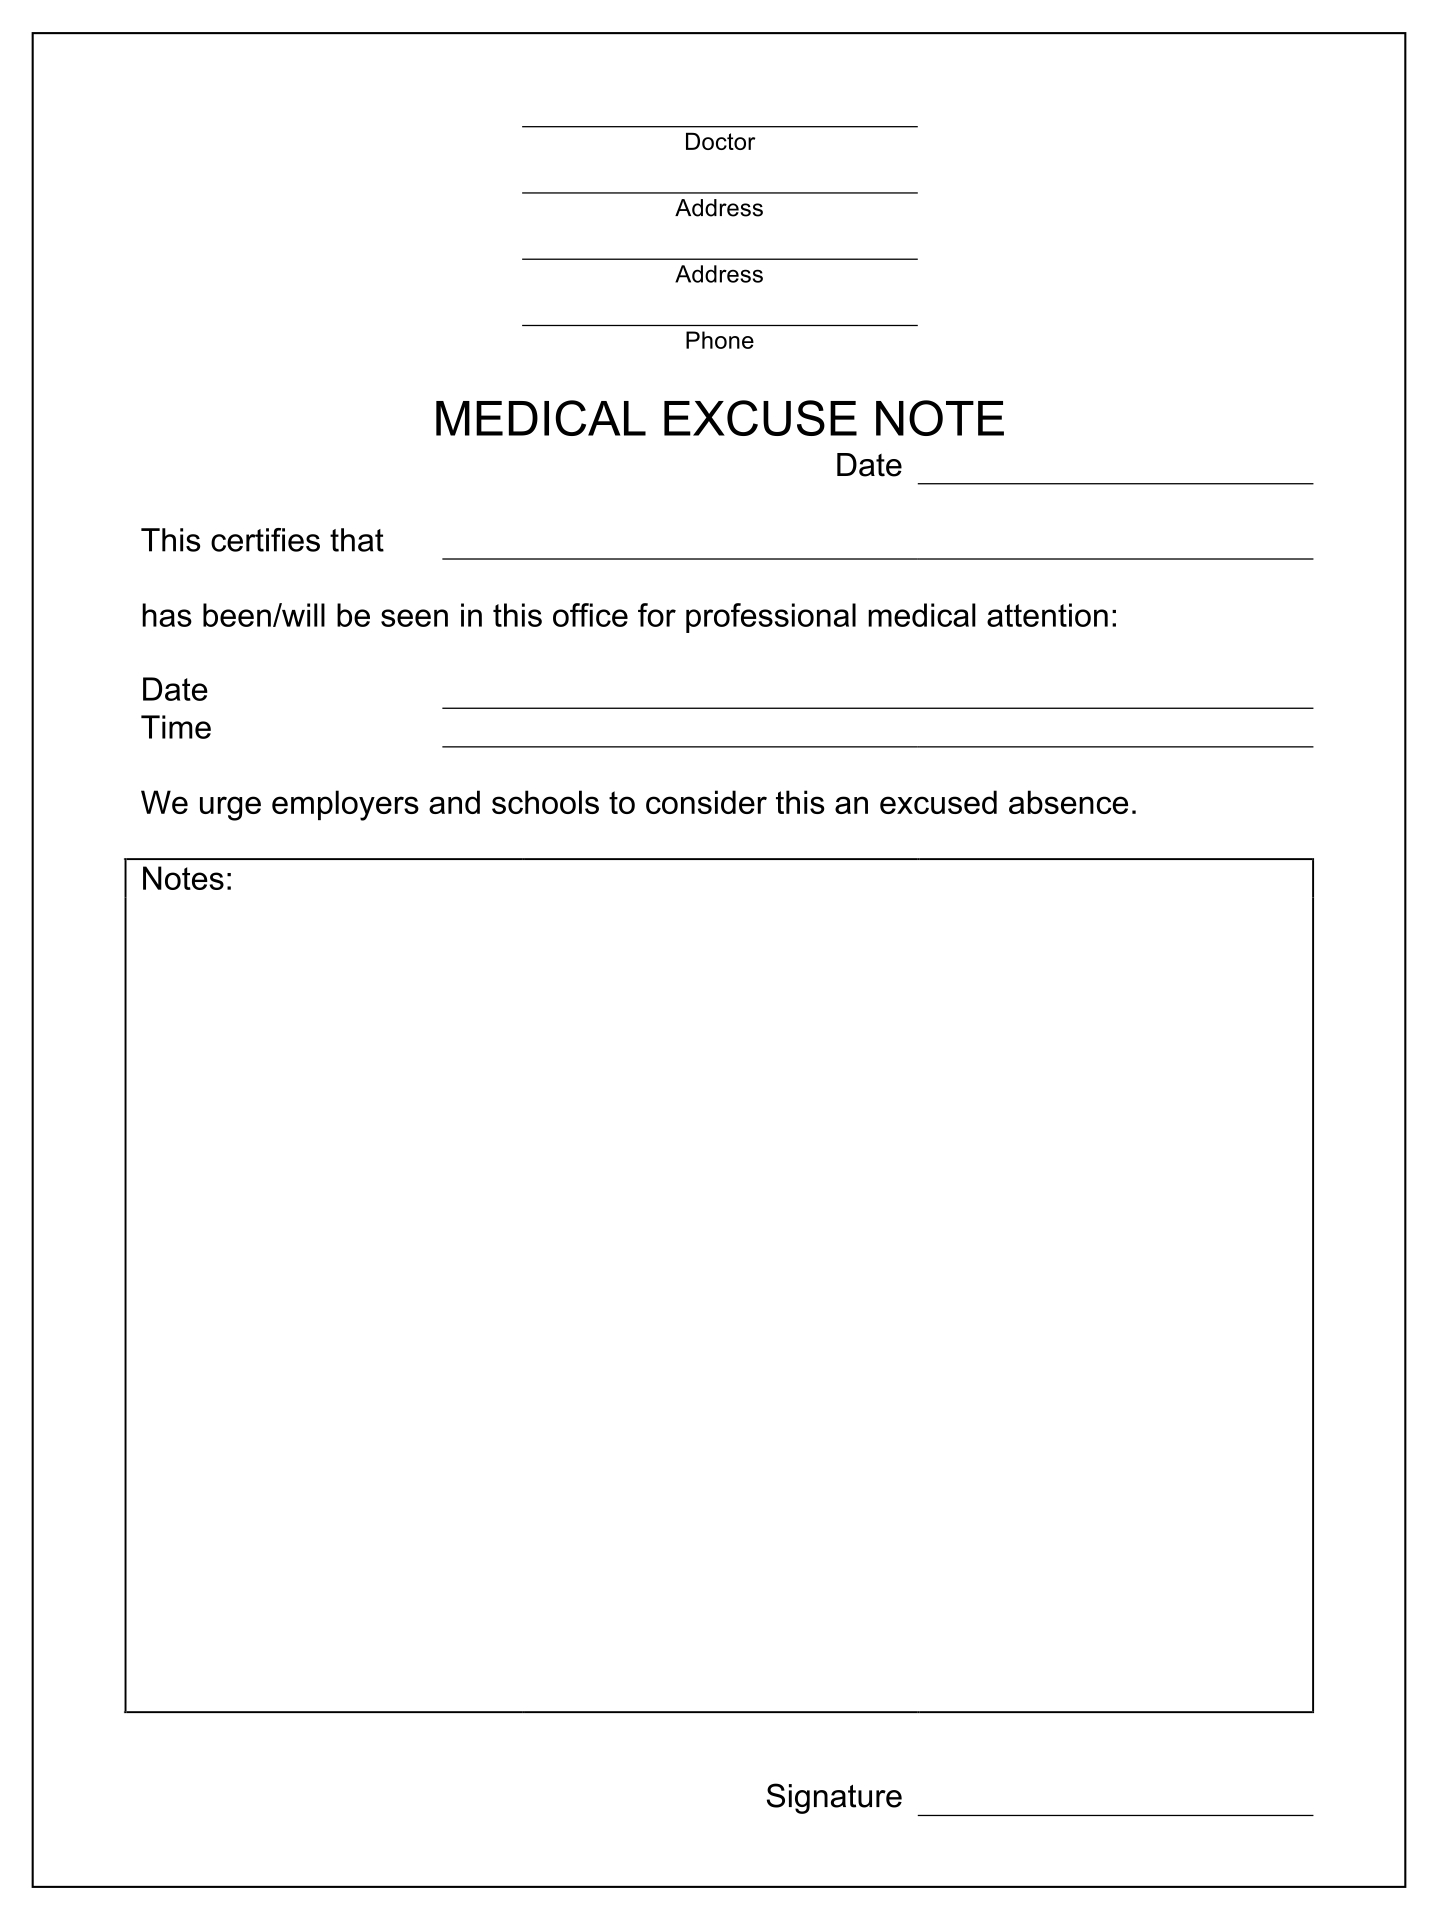 fake-covid-doctors-note-template